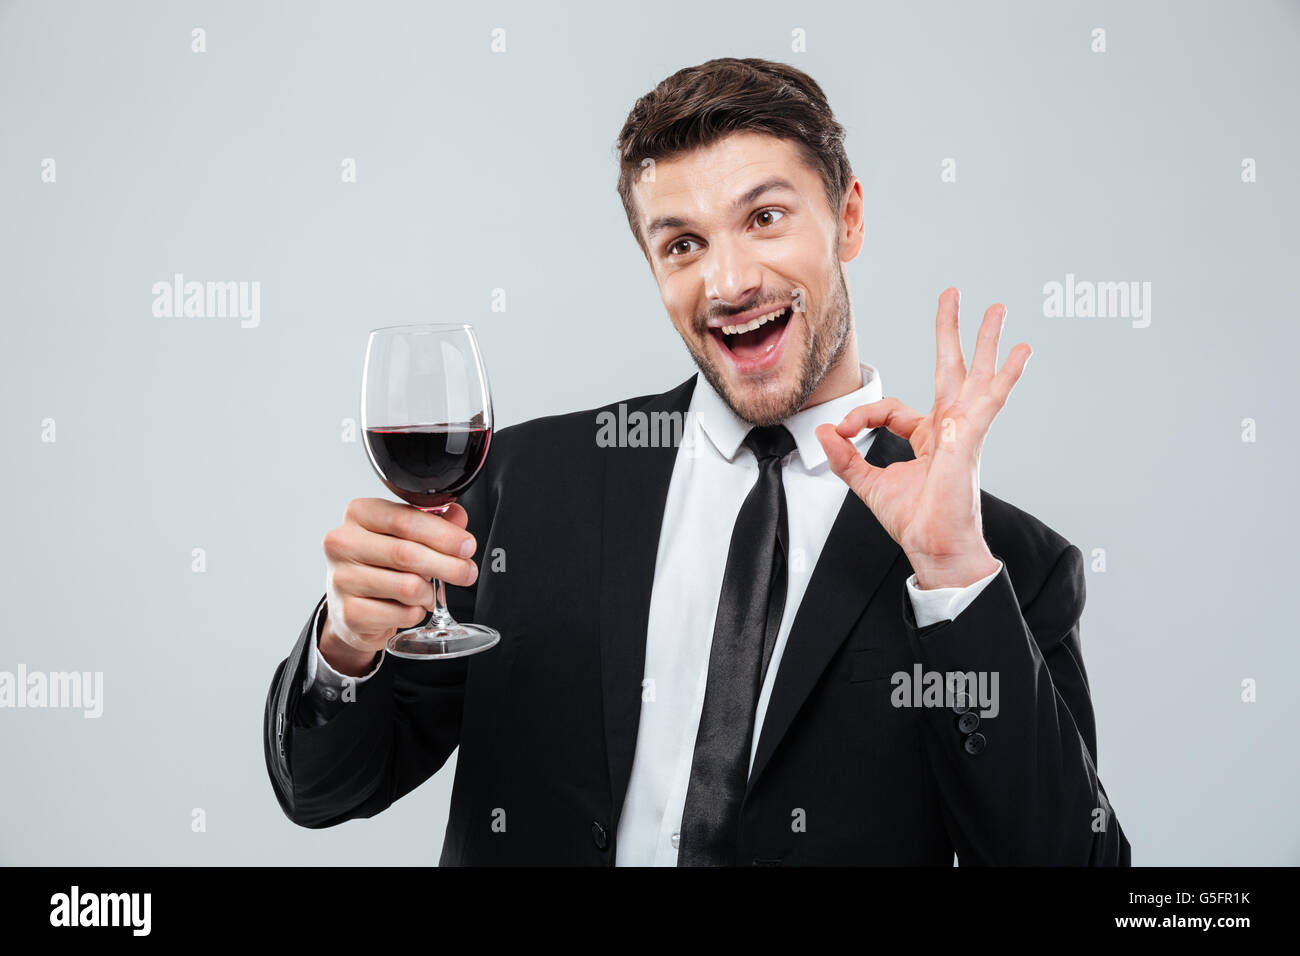 Funny cheerful drunk businessman drinking red wine and showing ok sign over white background Stock Photo